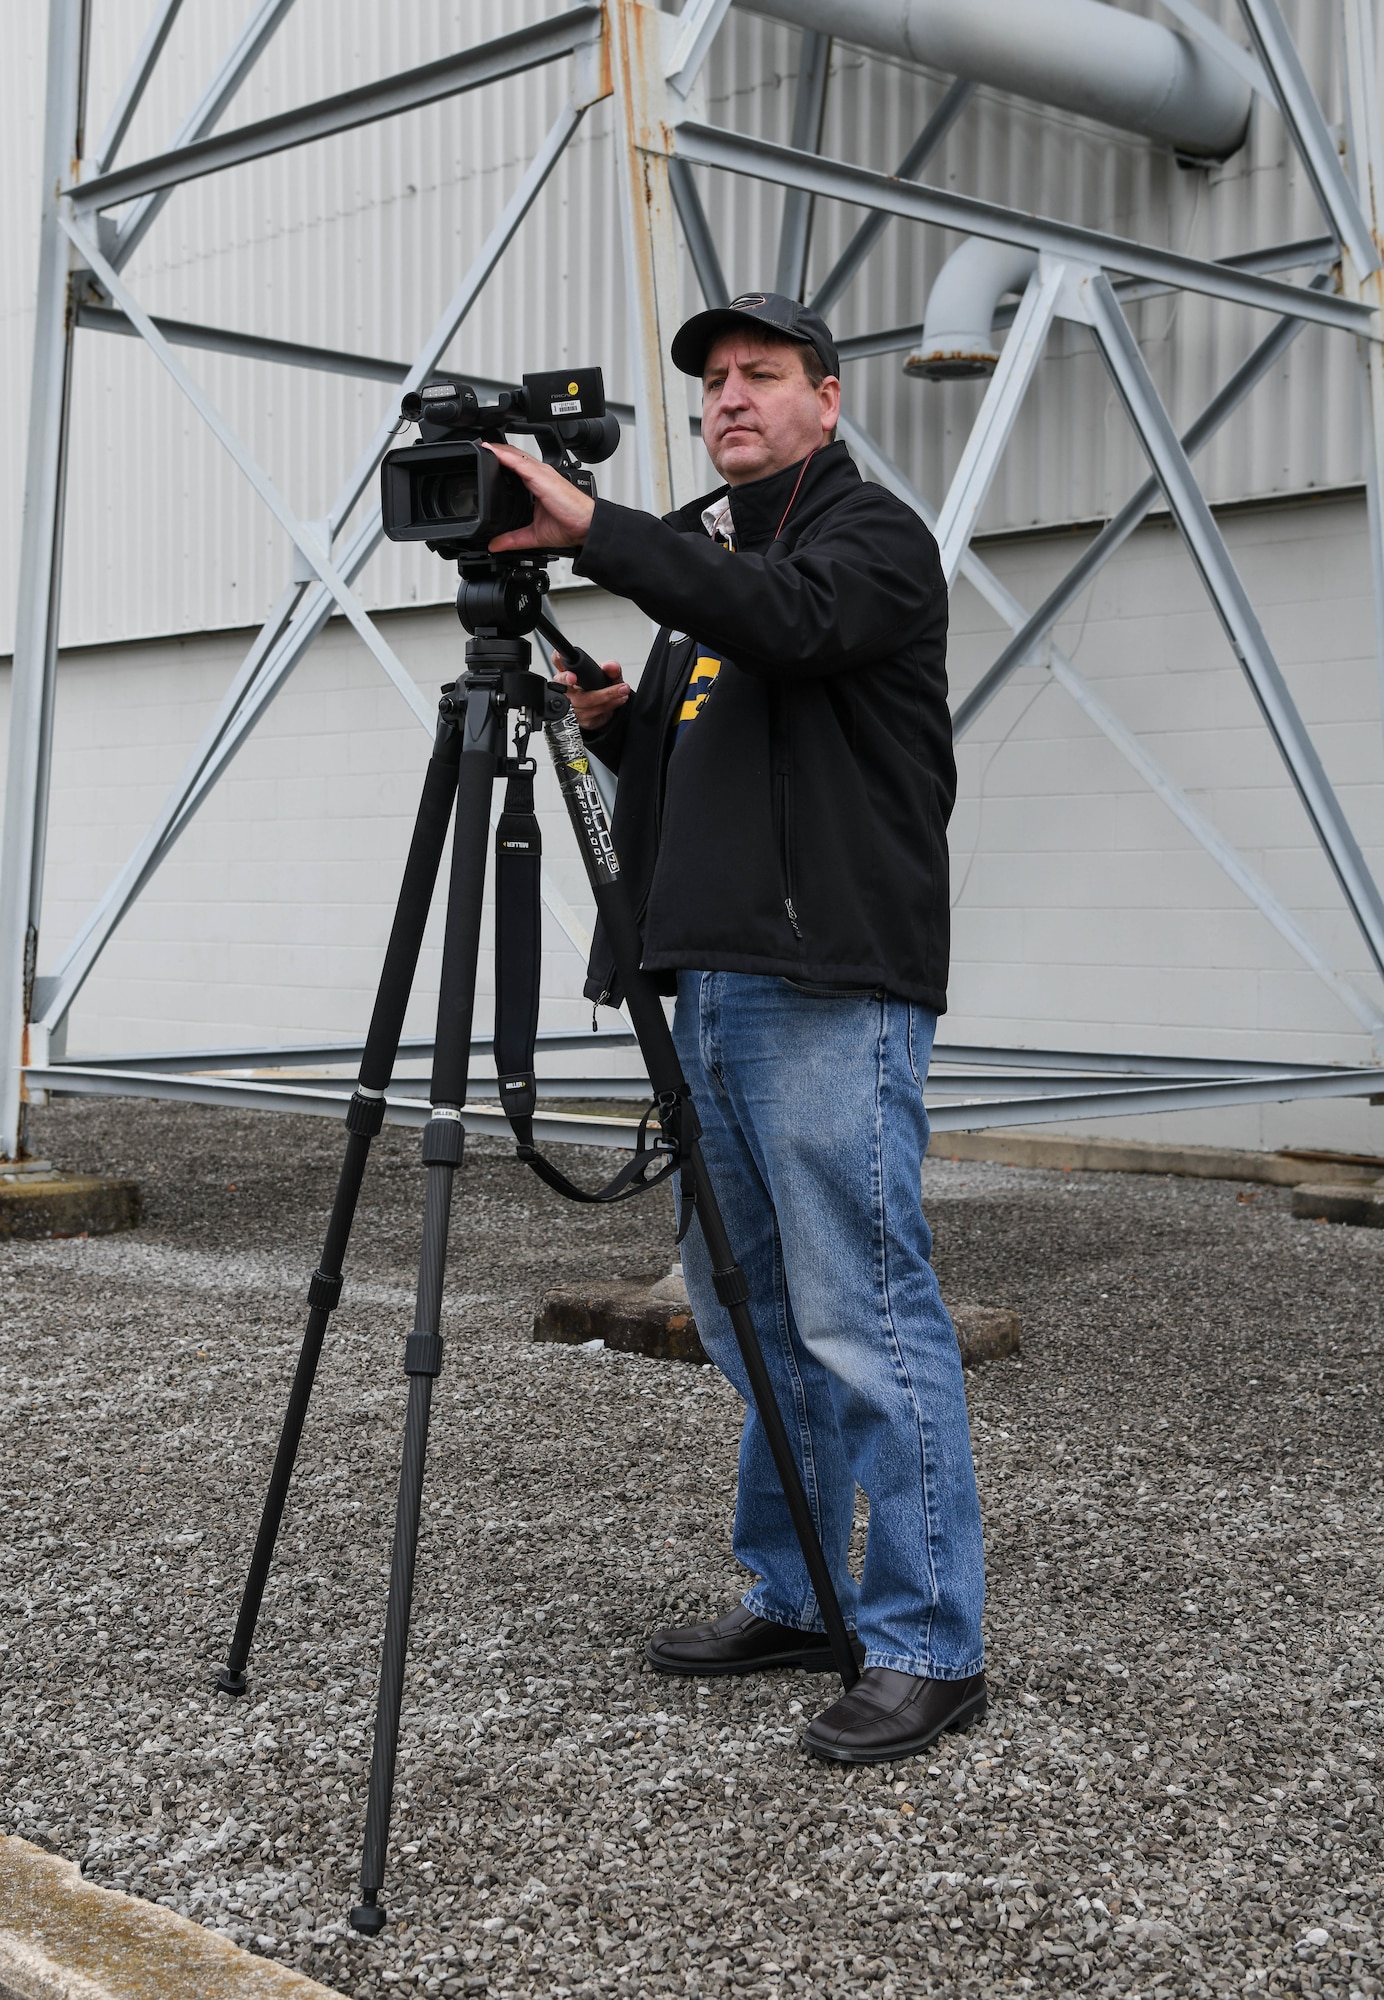 David Wright, a videographer for Arnold Engineering Development Complex, prepares to capture video in support of the AEDC test mission, Dec. 14, 2020, at Arnold Air Force Base, Tenn. (U.S. Air Force photo by Jill Pickett)